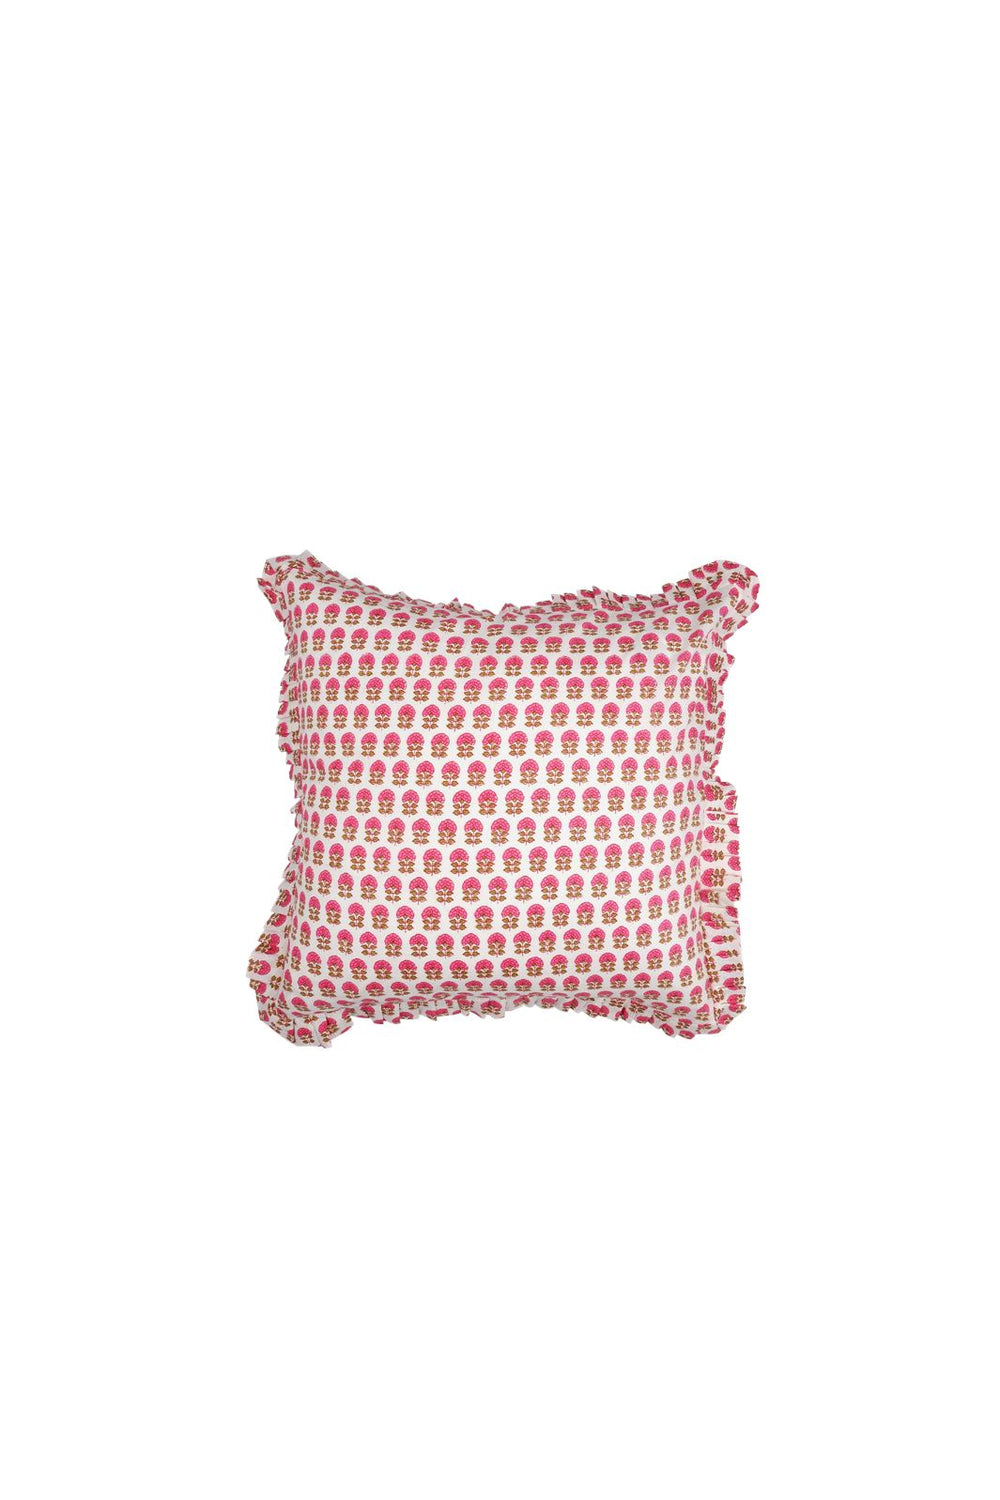 Black Colour - Bcflora Cushion Cover With Frill - Bouquet Pink